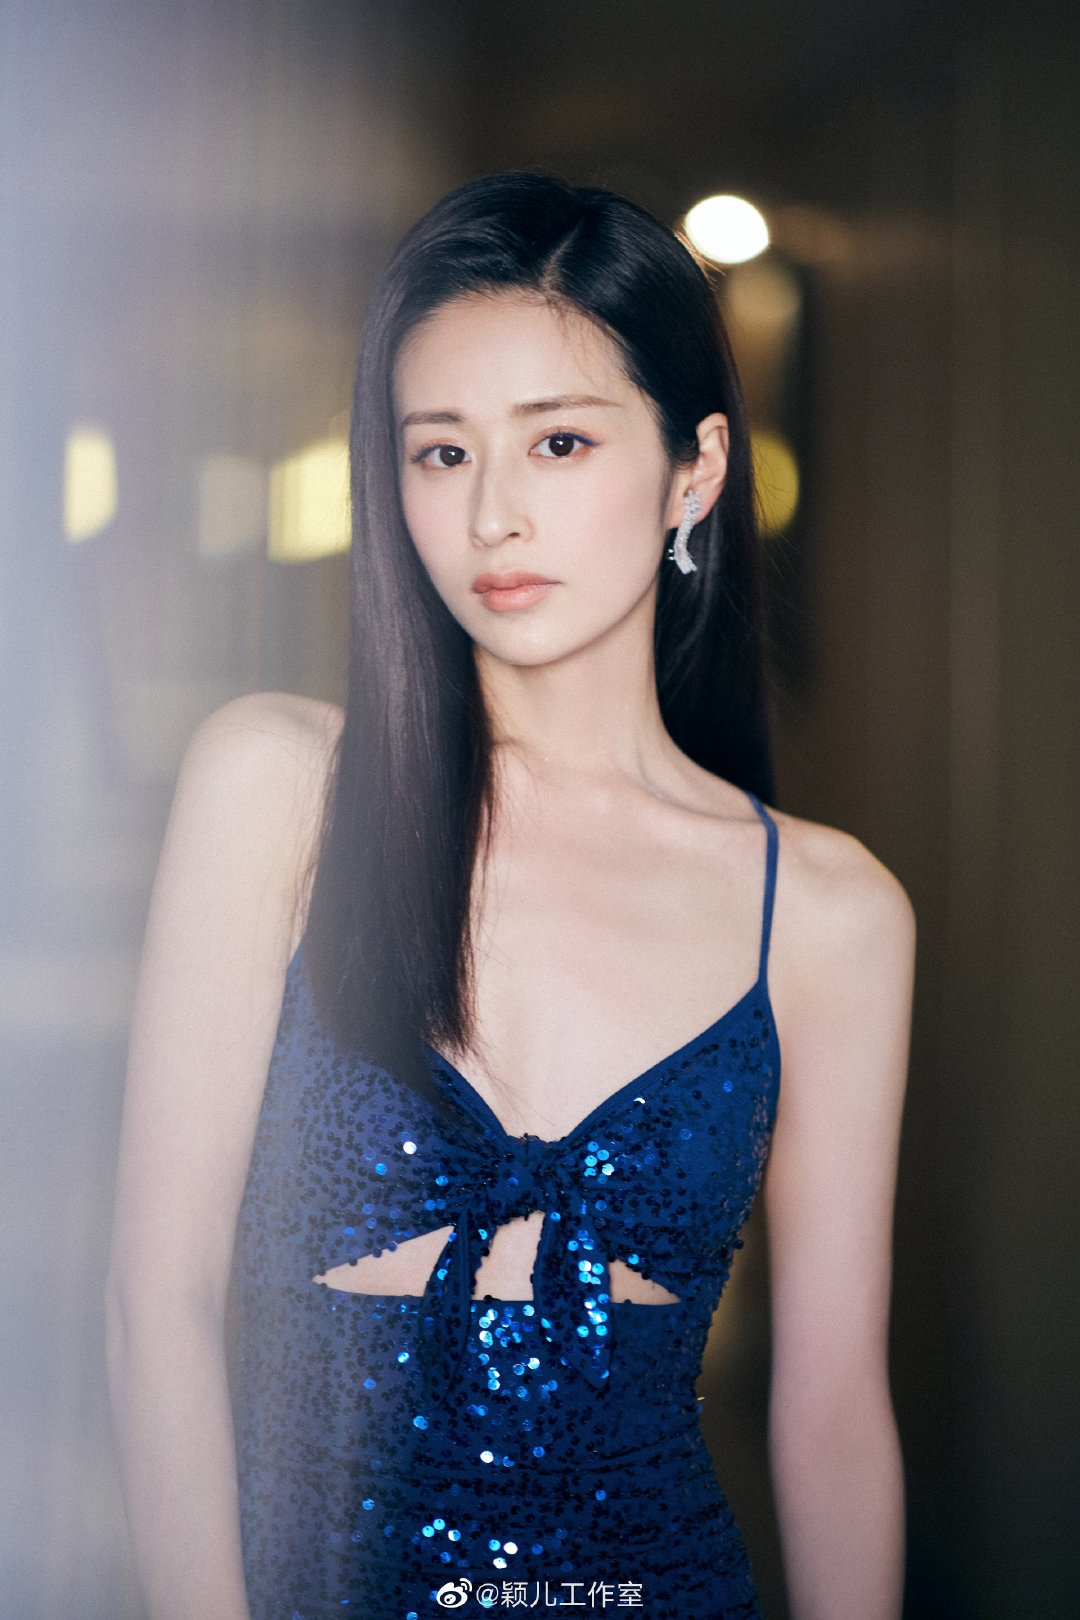 angelababy：全身上下珠光璀璨，感觉怎么样？